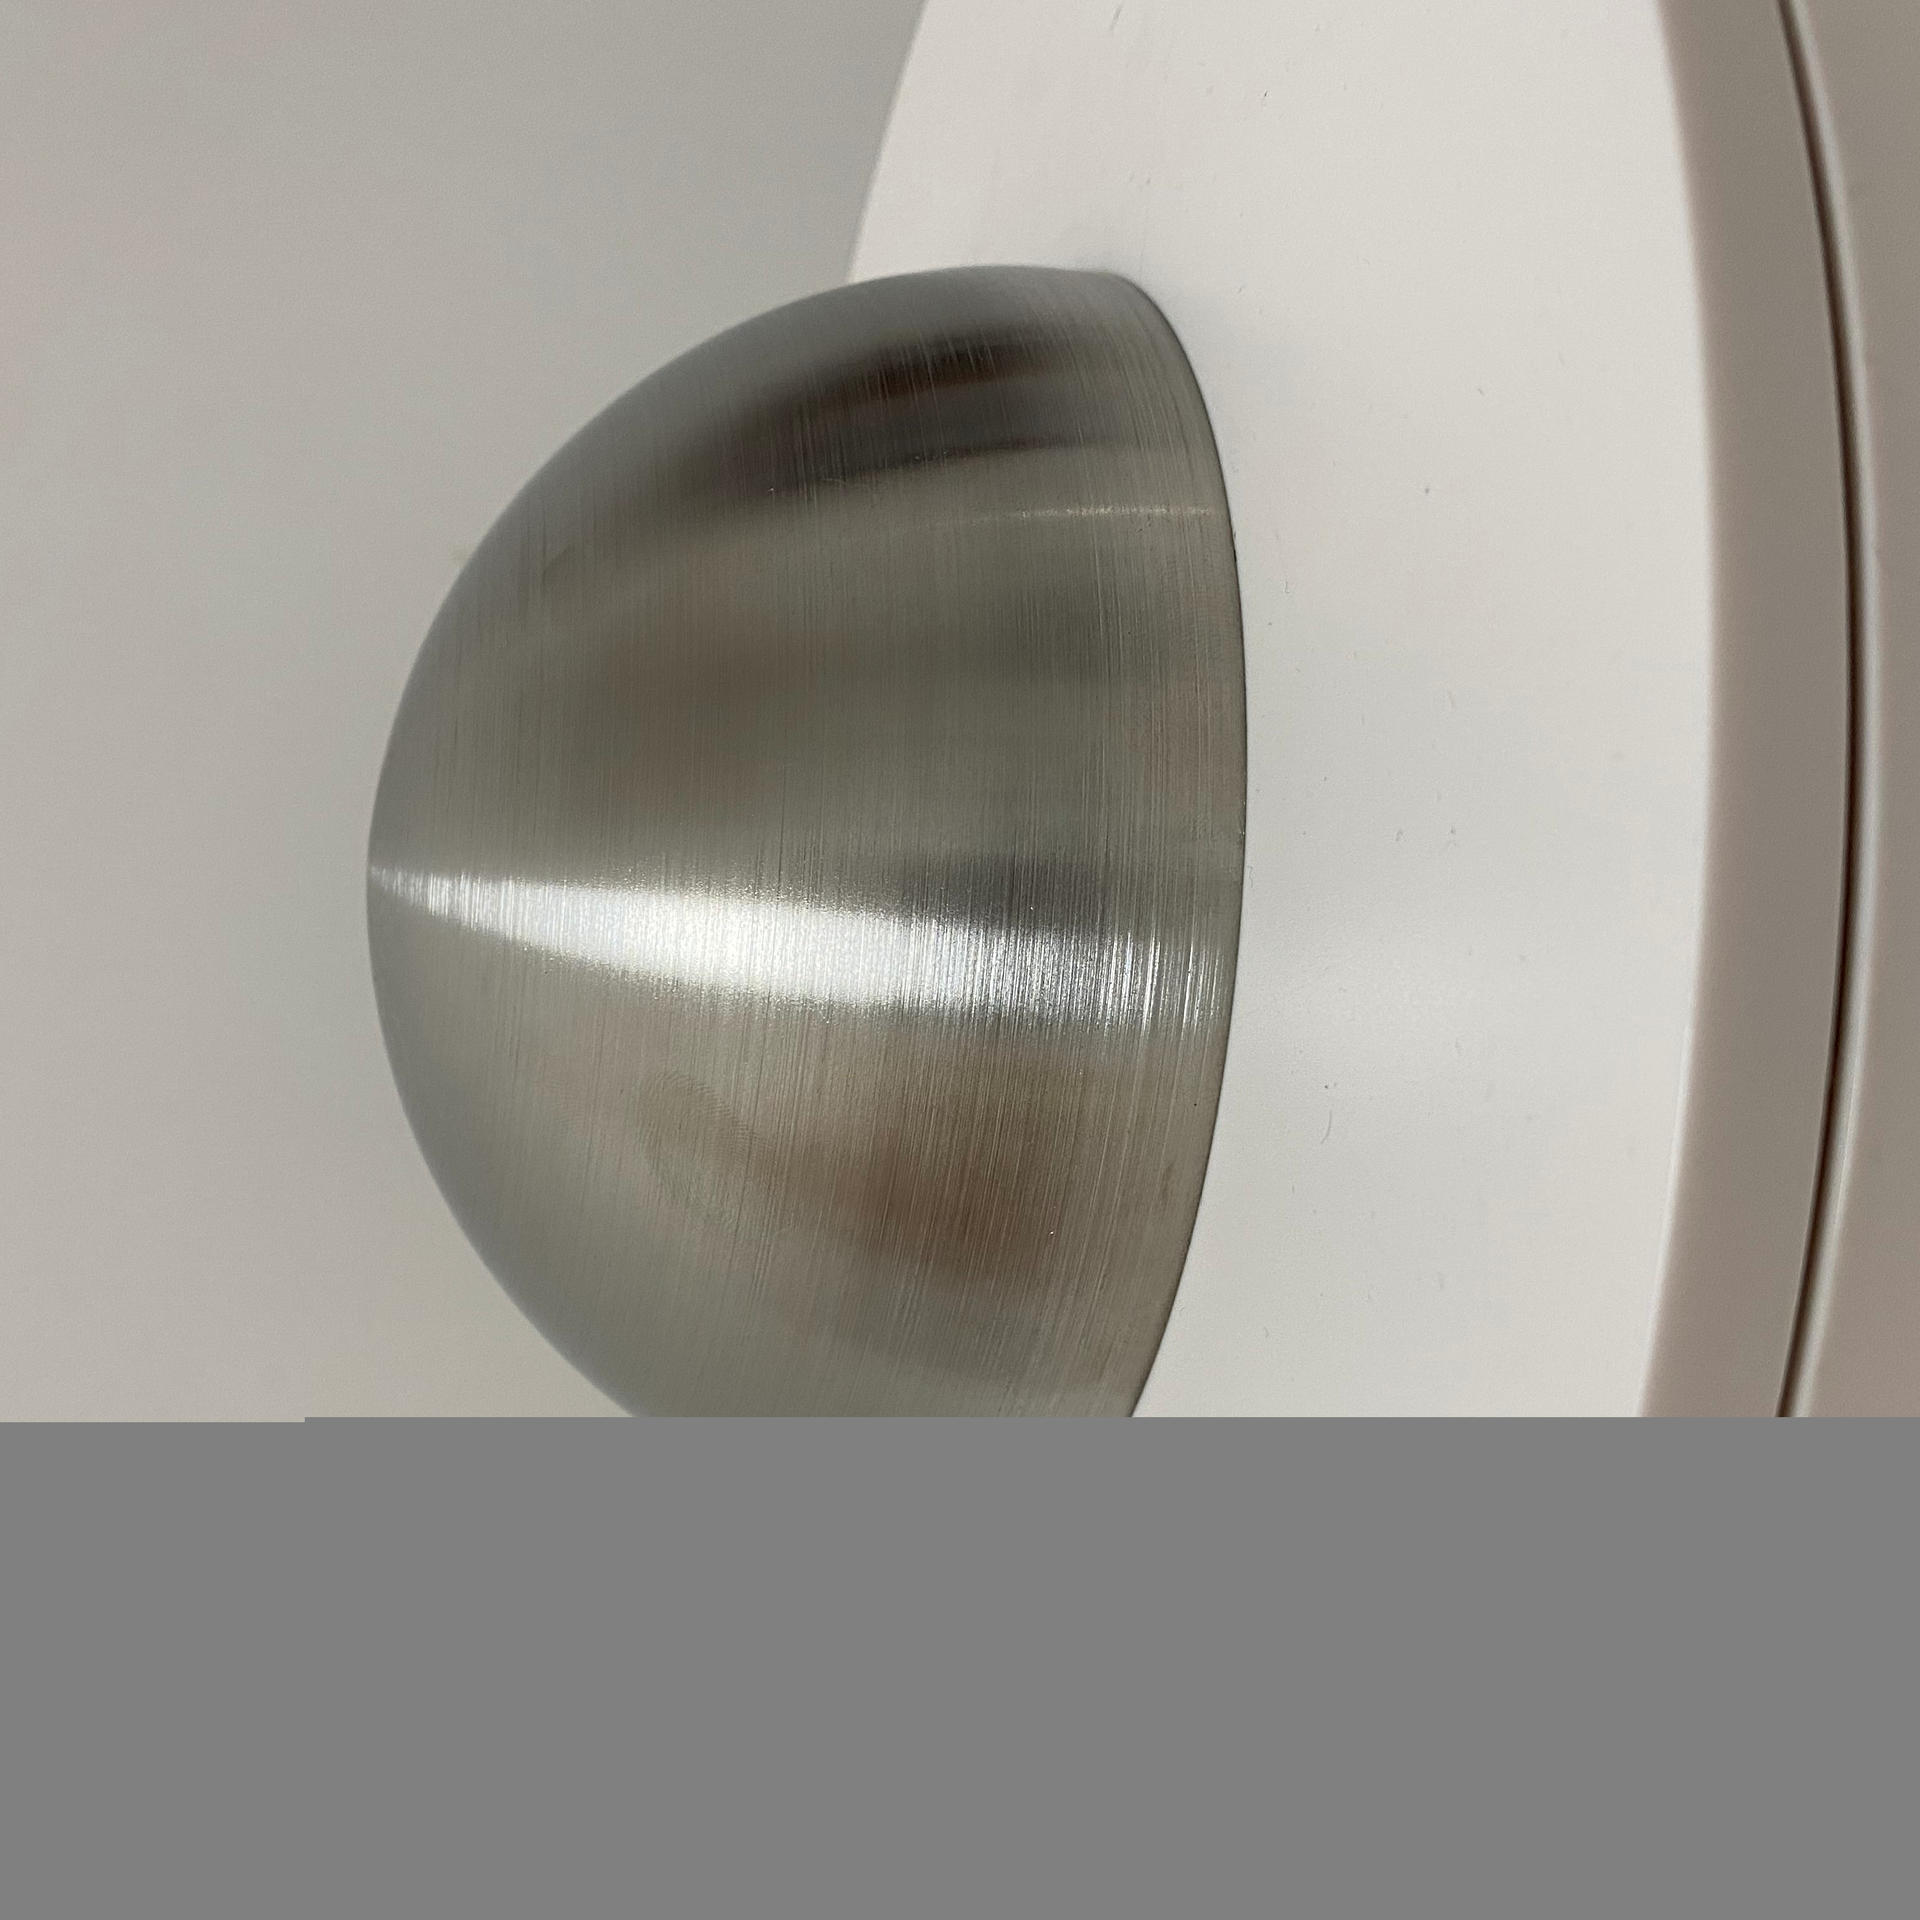 150MM Stainless Steel Brushed Hemisphere Dome for Decoration